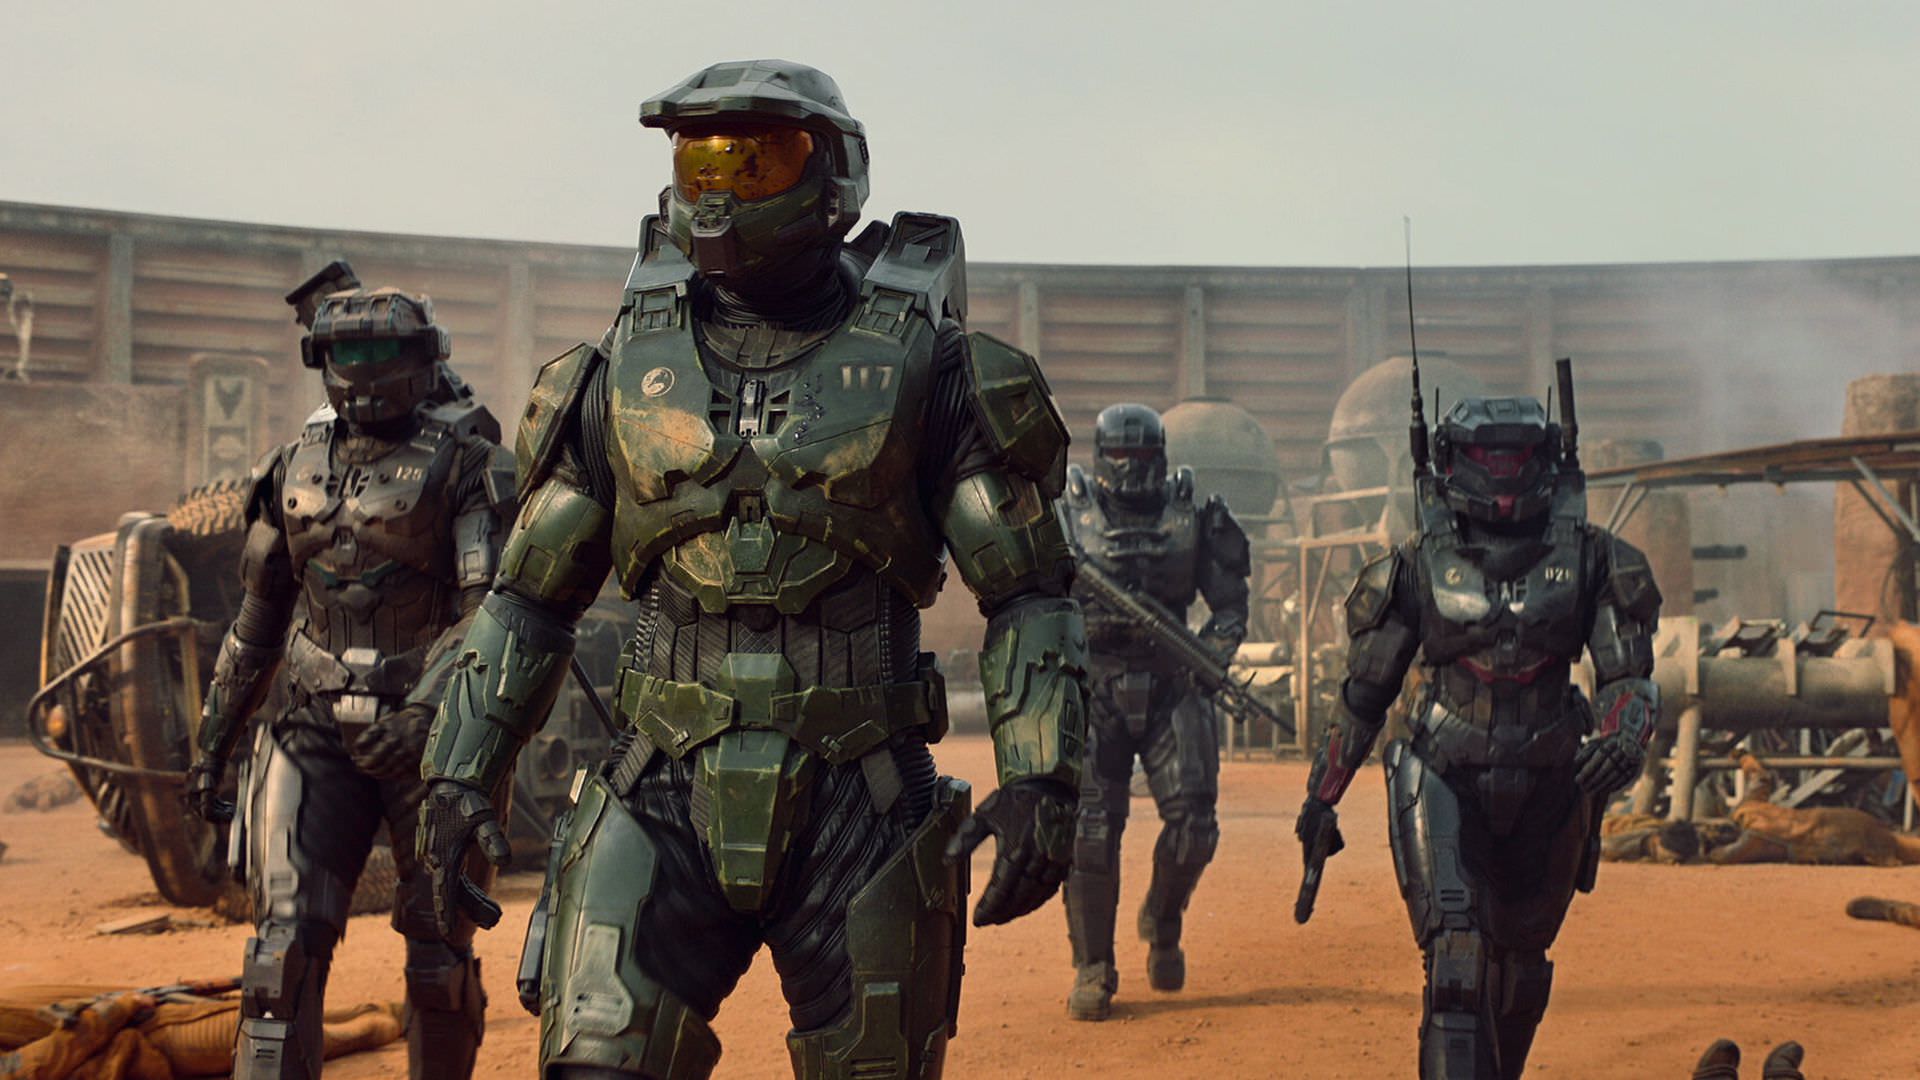 Master Chief and the Spartans walking around in the Halo series